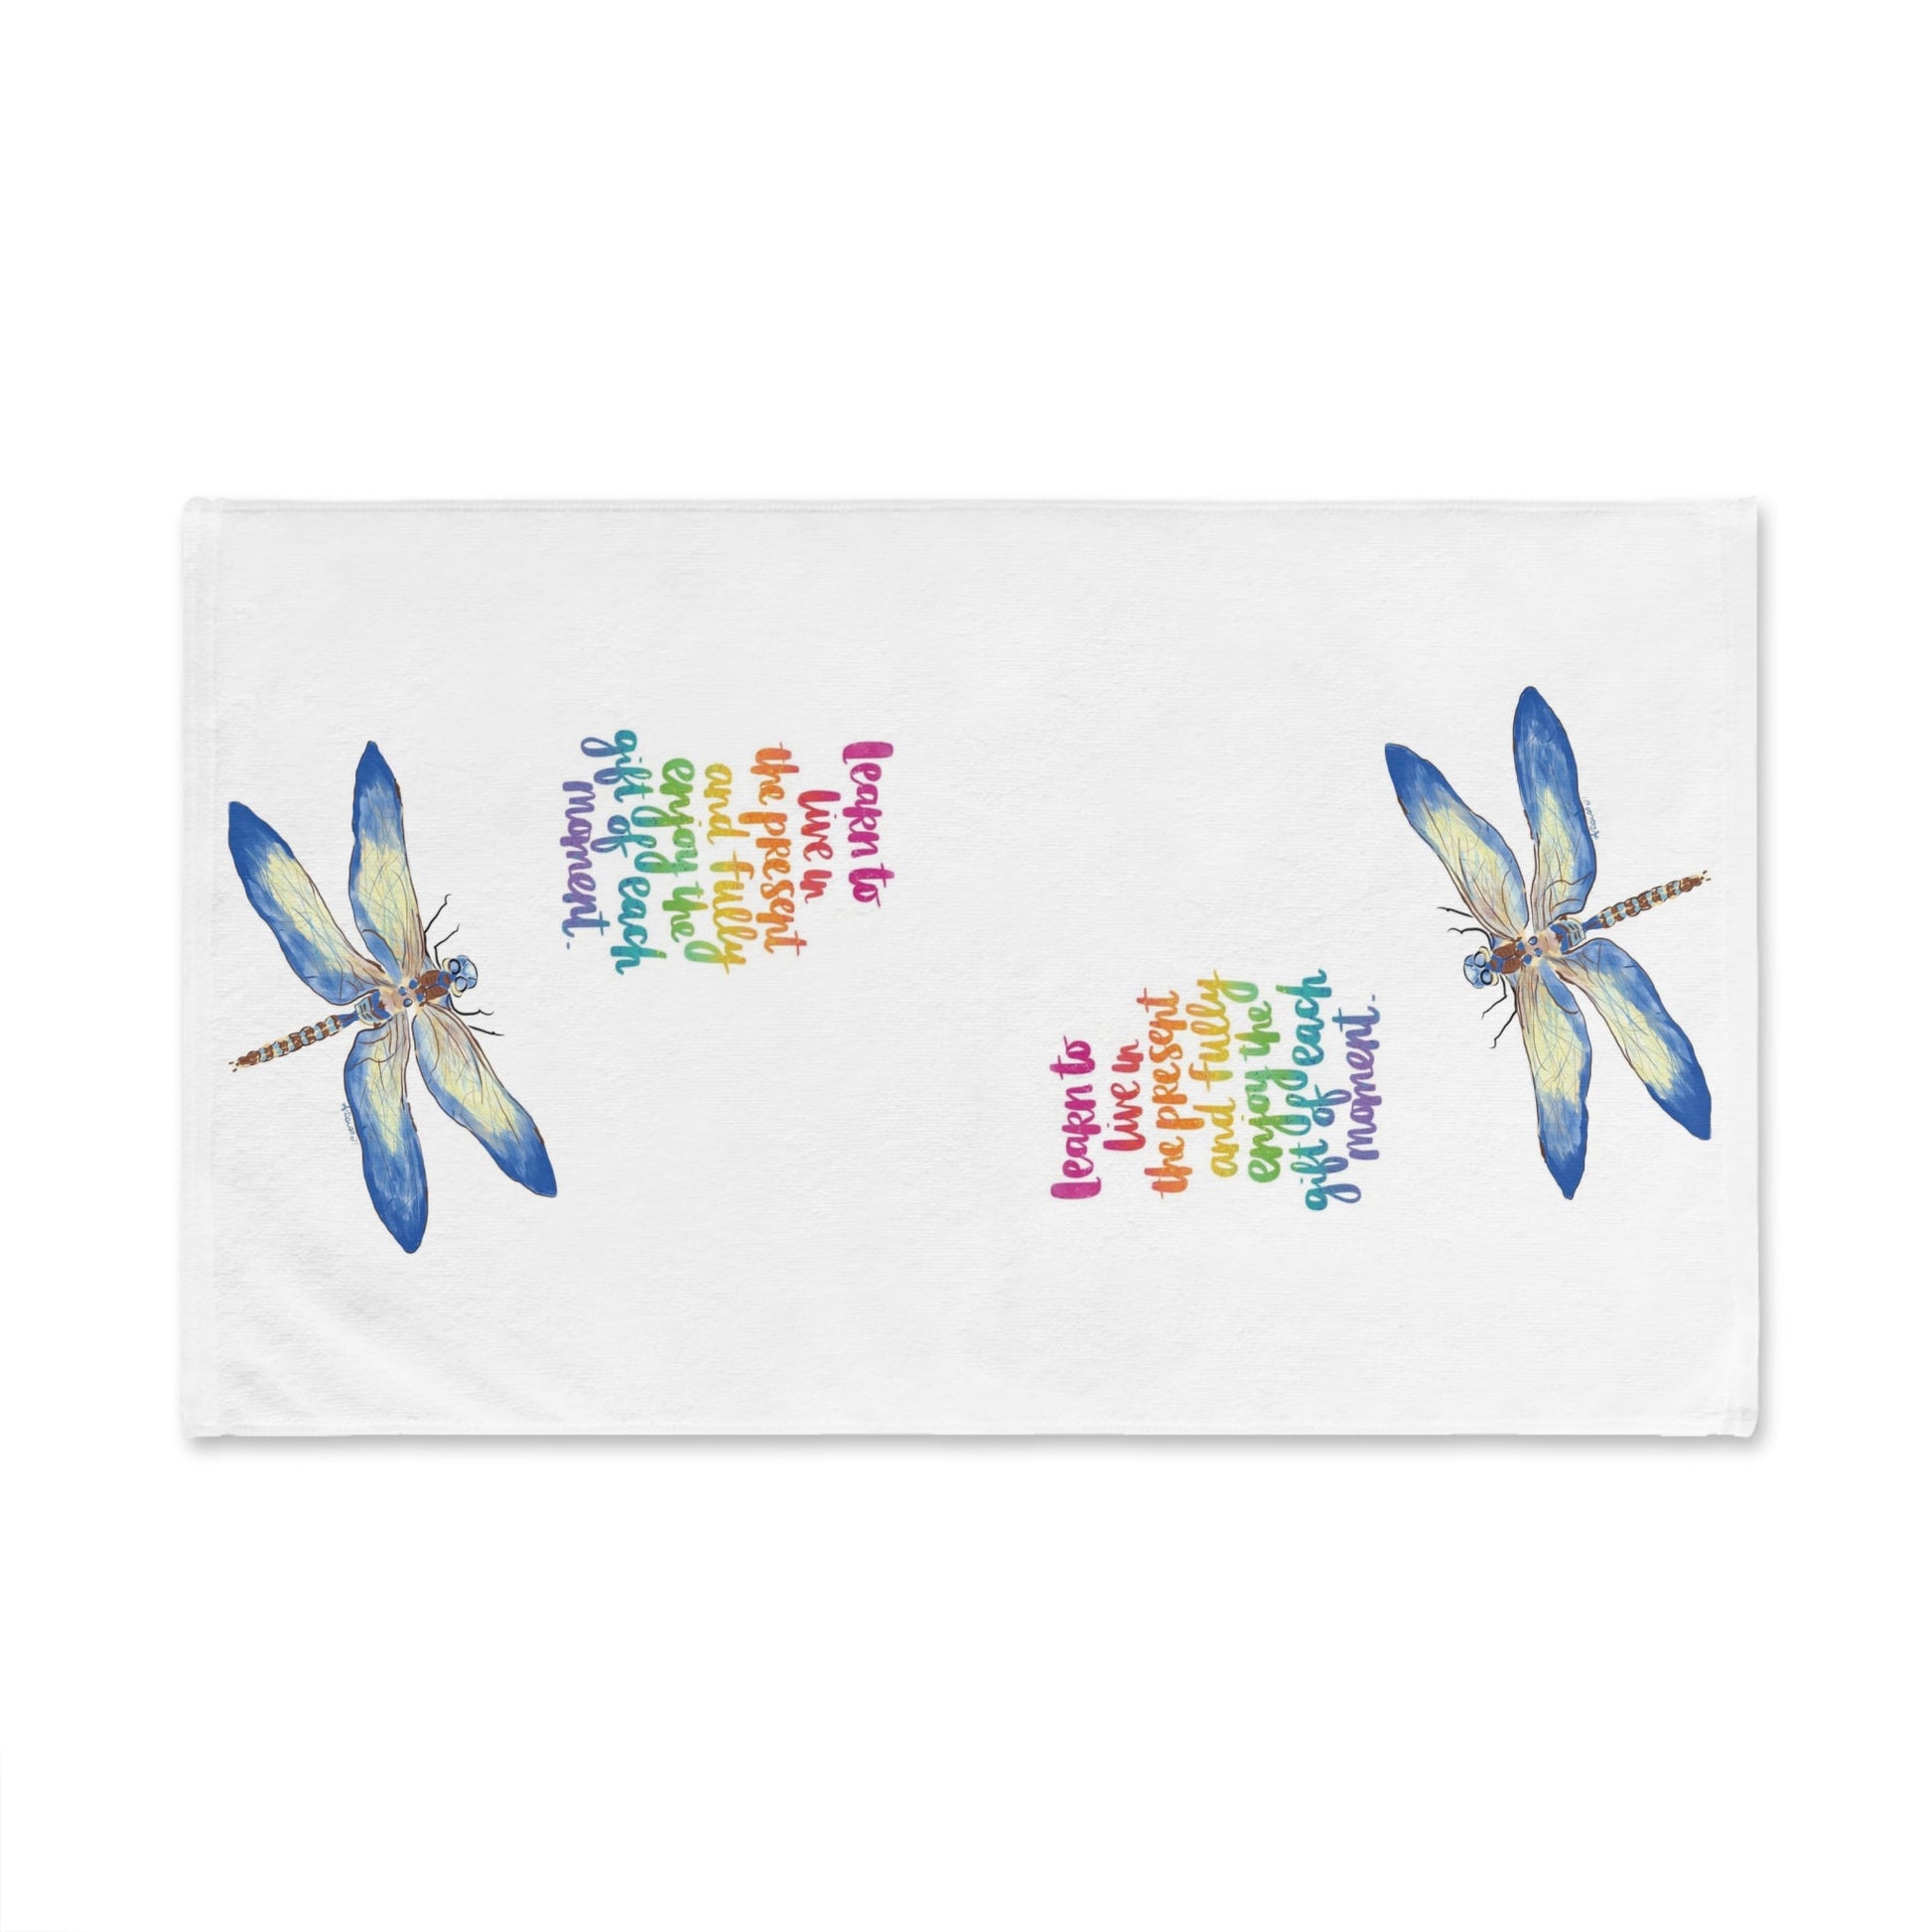 Dragonfly Hand Towel (Poly/Cotton) - Blue Cava